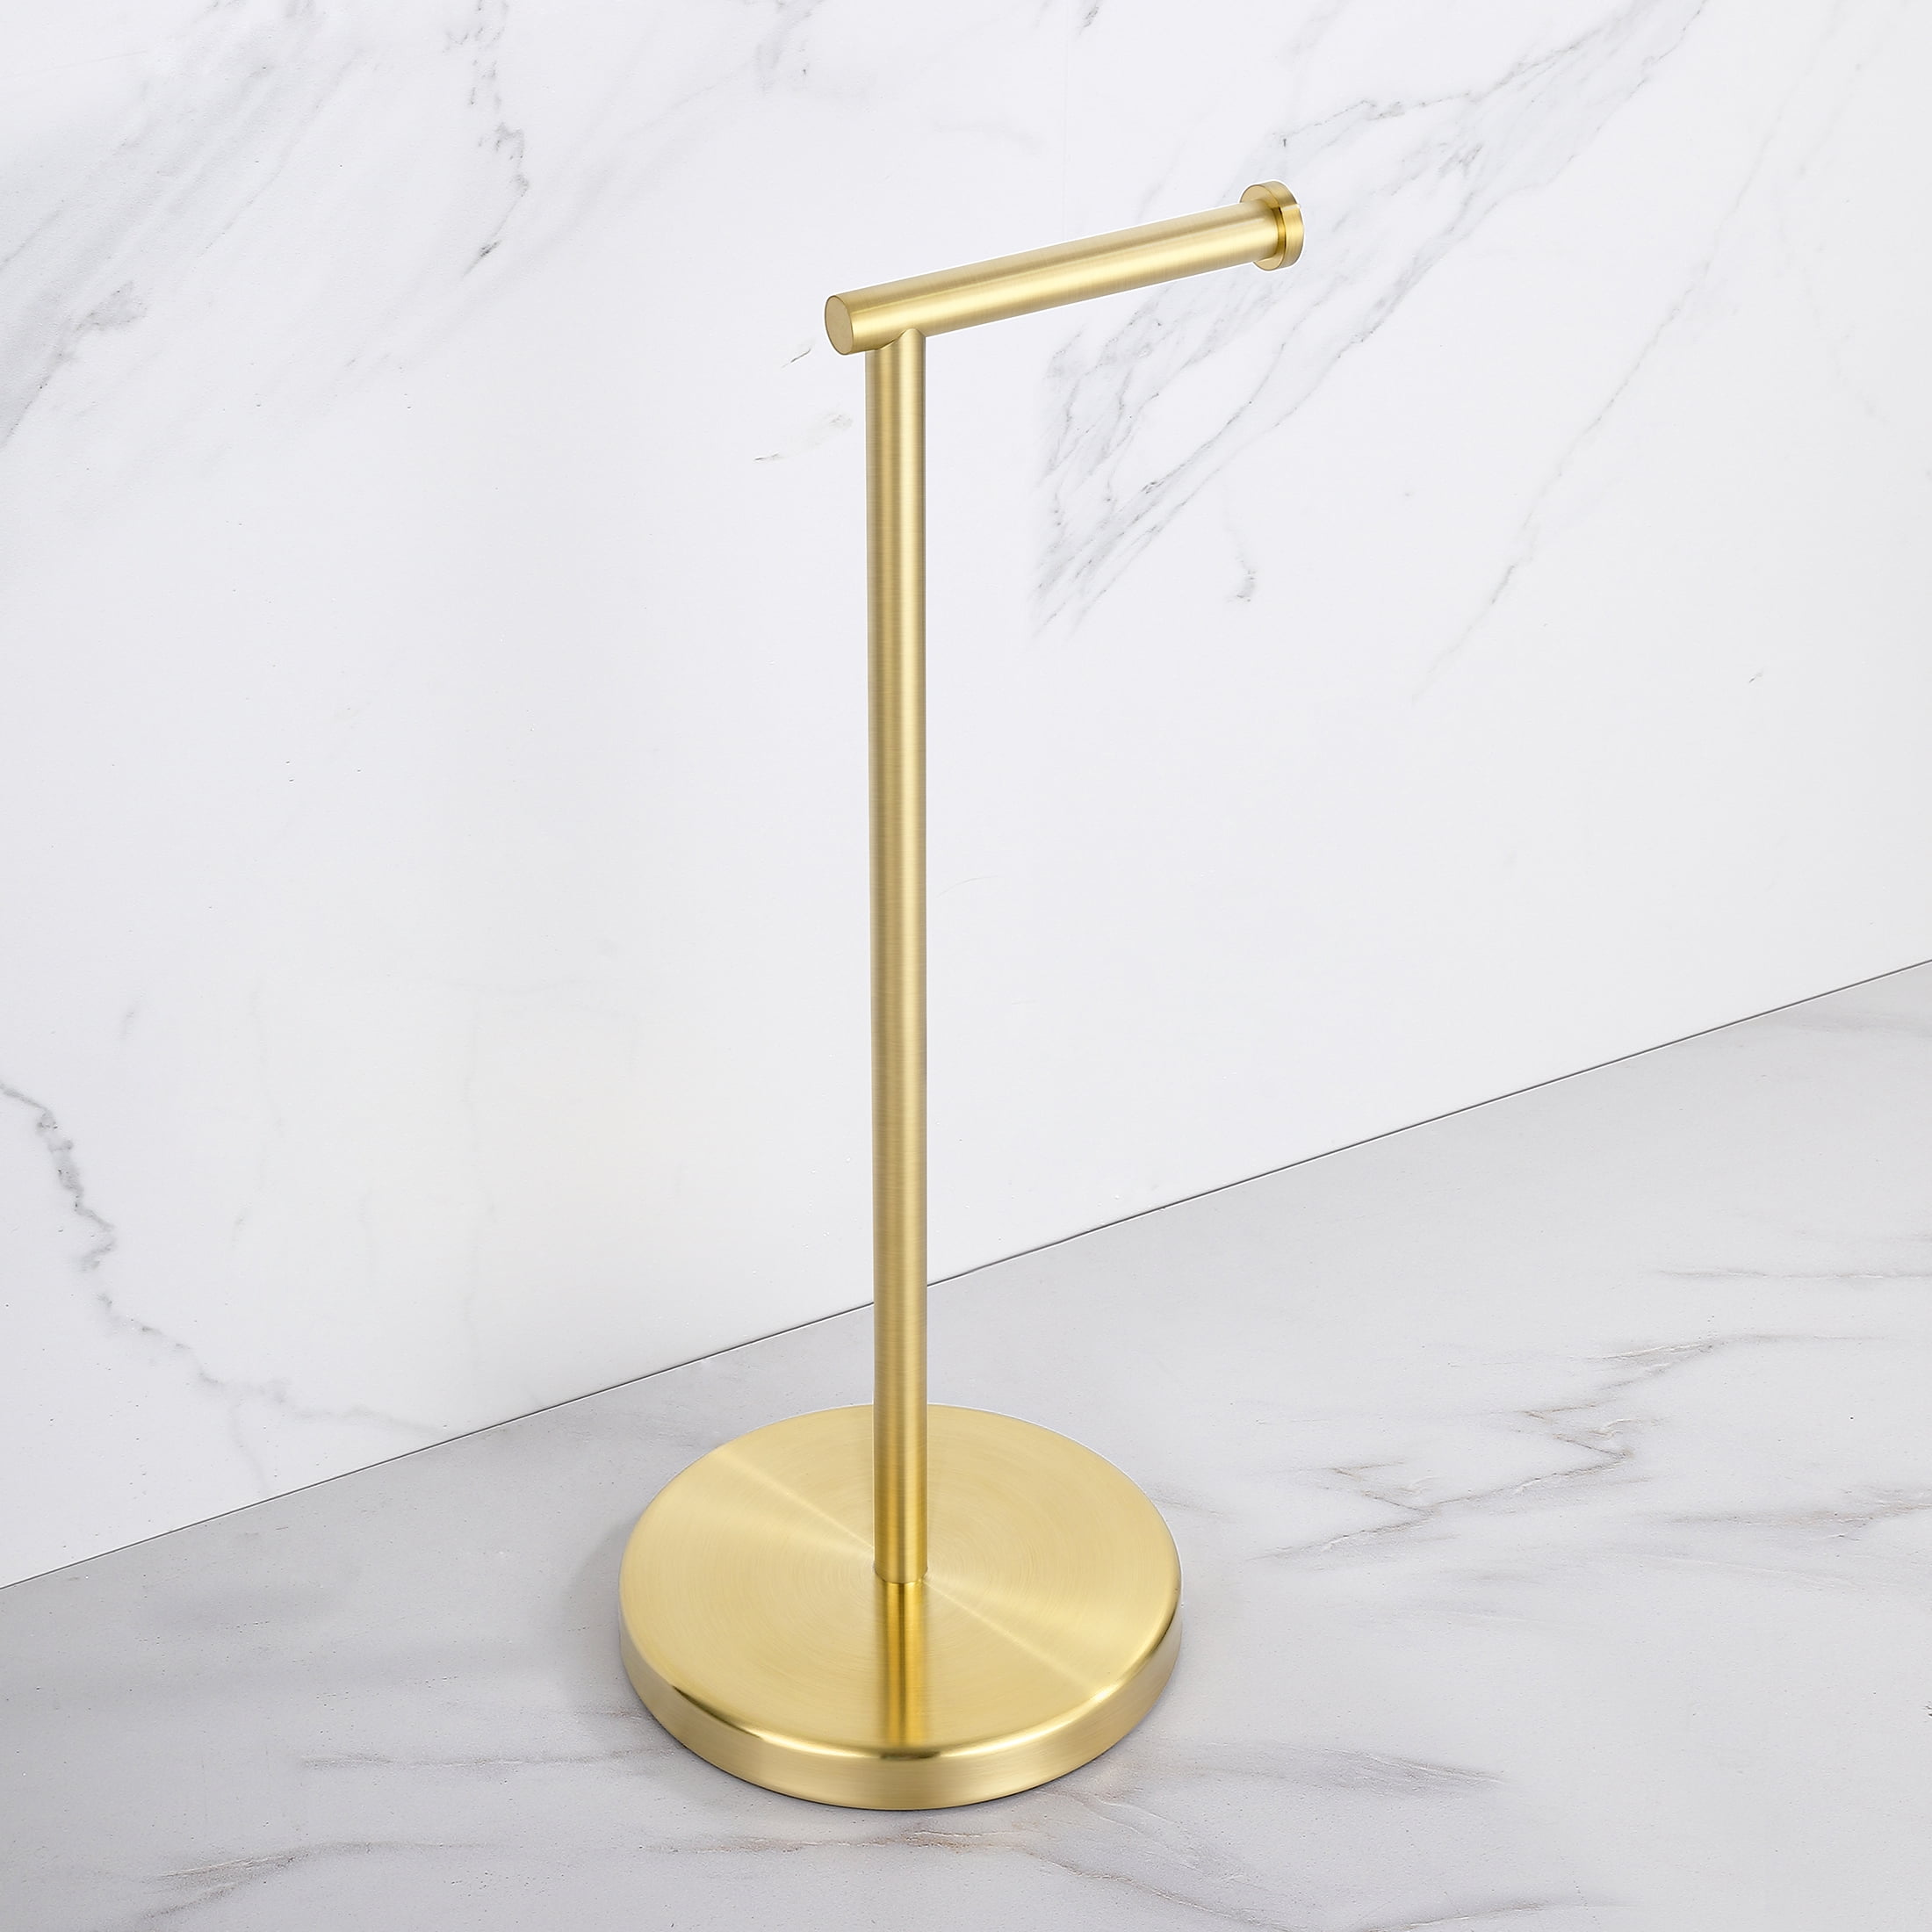 Kes Free Standing Bathroom Toilet Paper Holder Stand with Reserve Toilet Paper Storage SUS304 Stainless Steel Rustproof Brushed Brass, Bph286s1b-bz